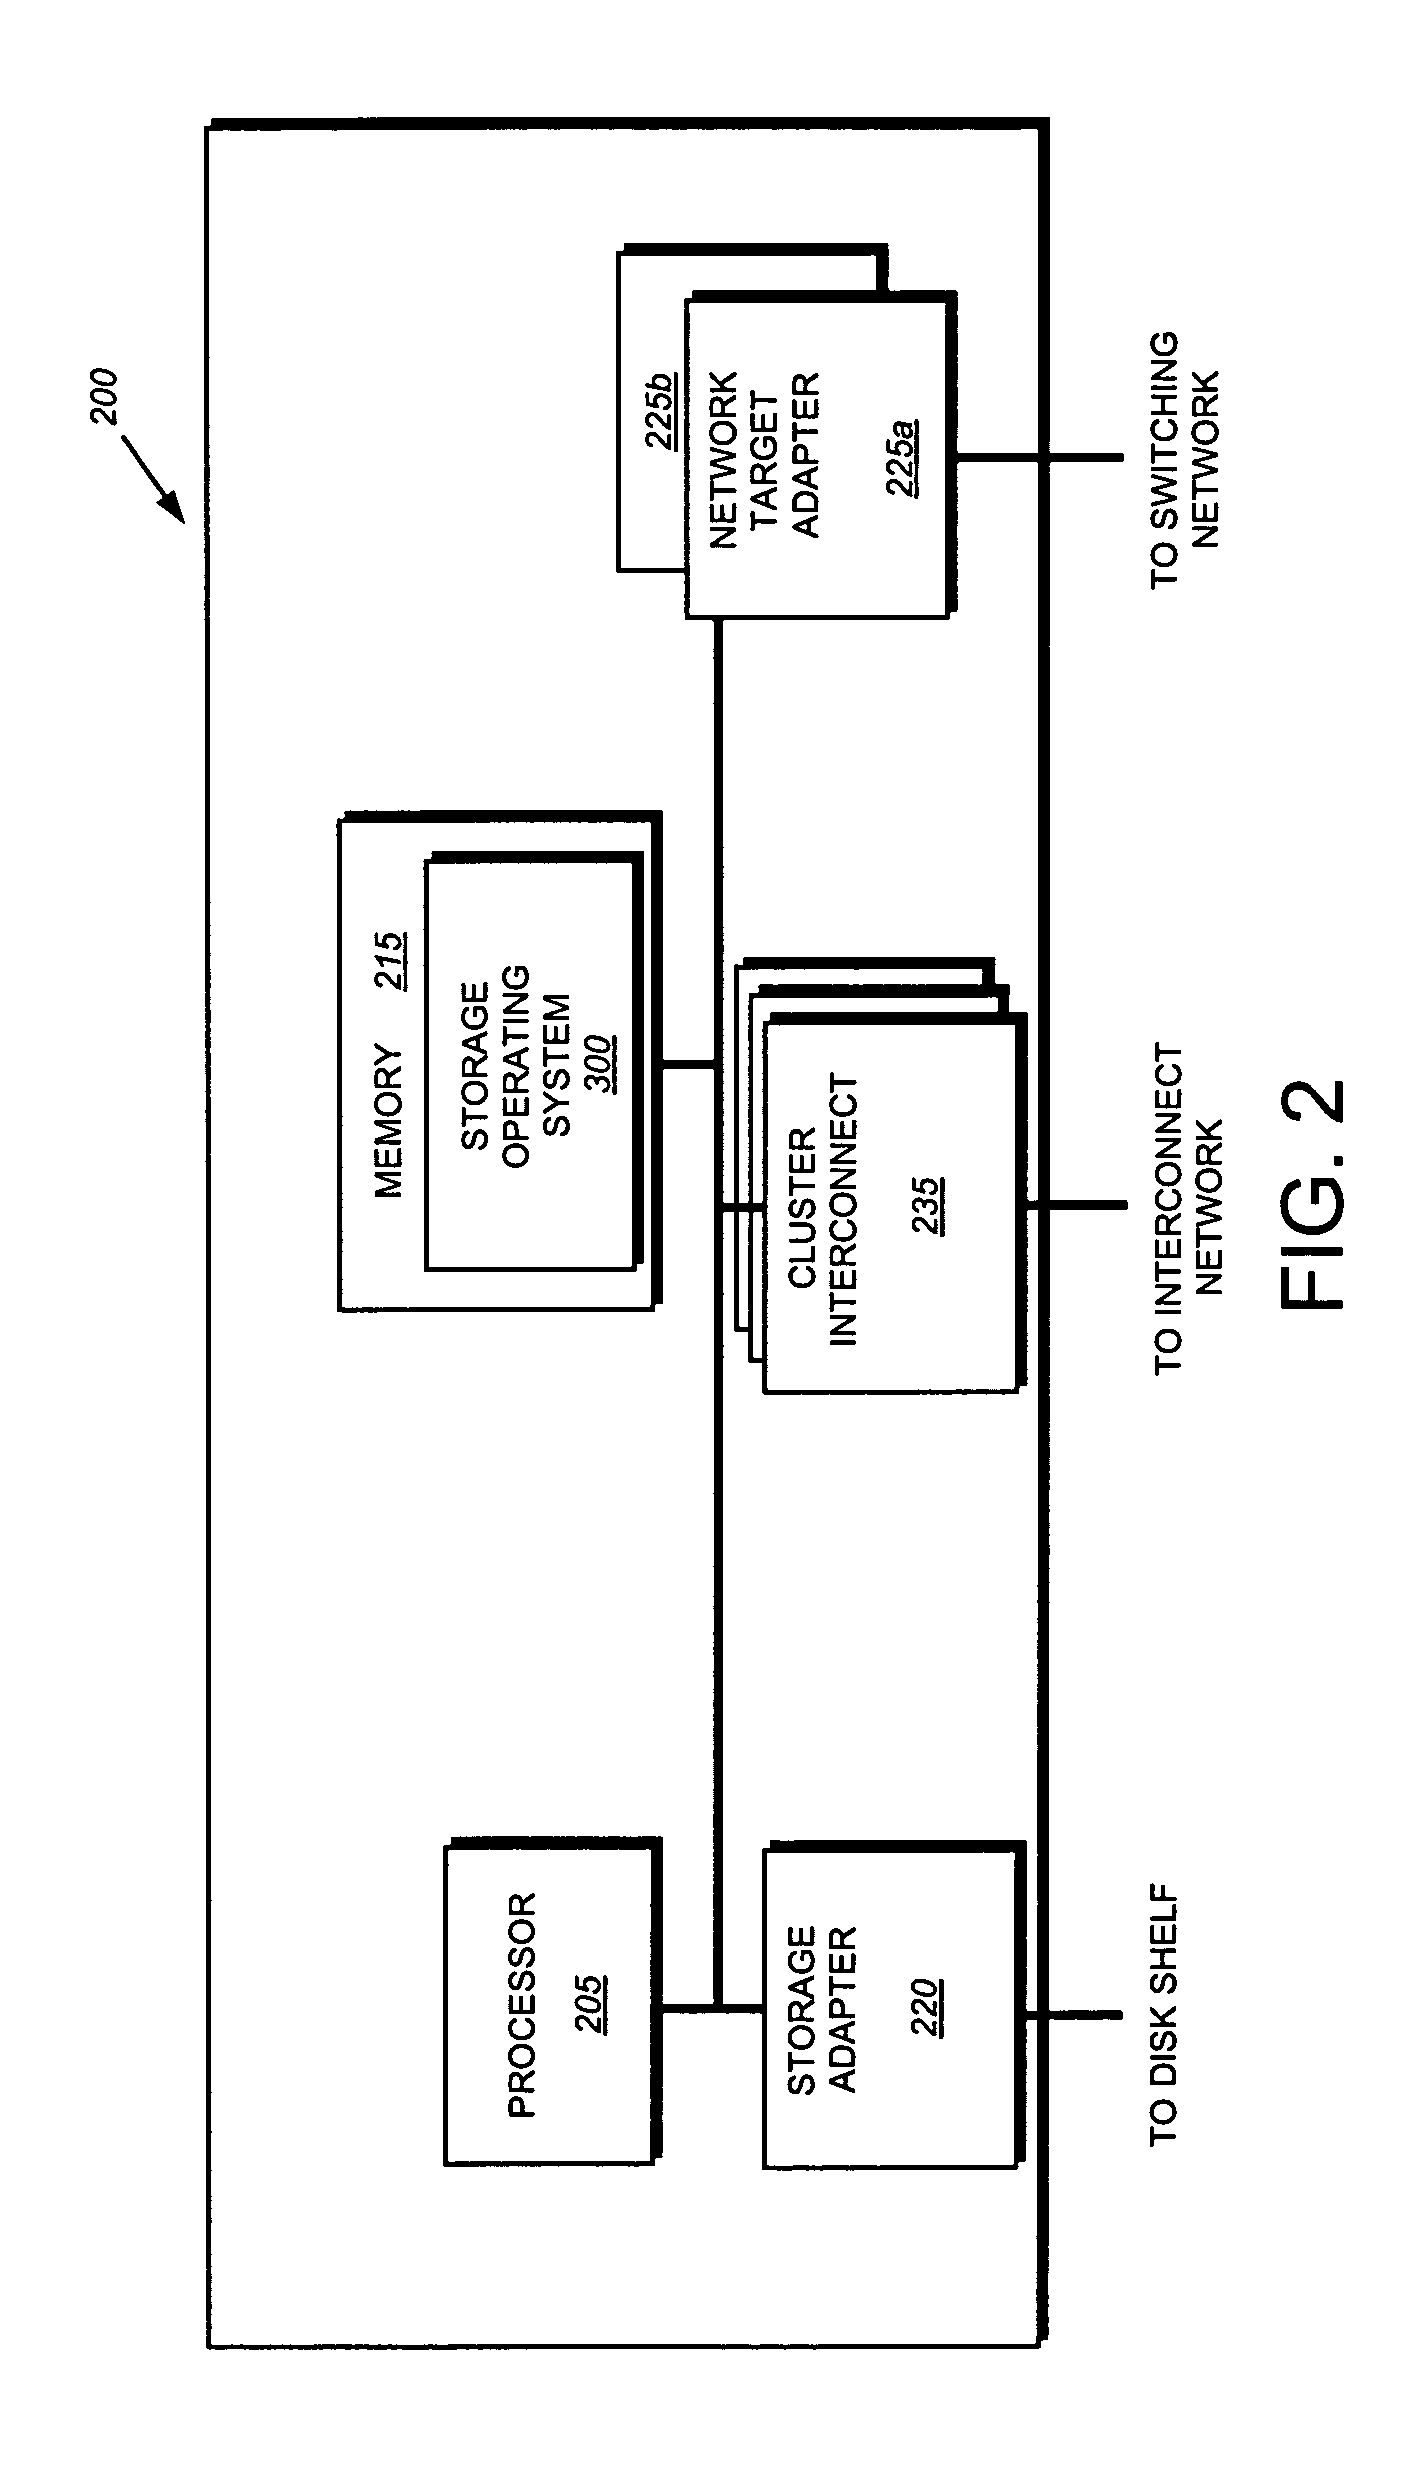 System and method for reliable peer communication in a clustered storage system